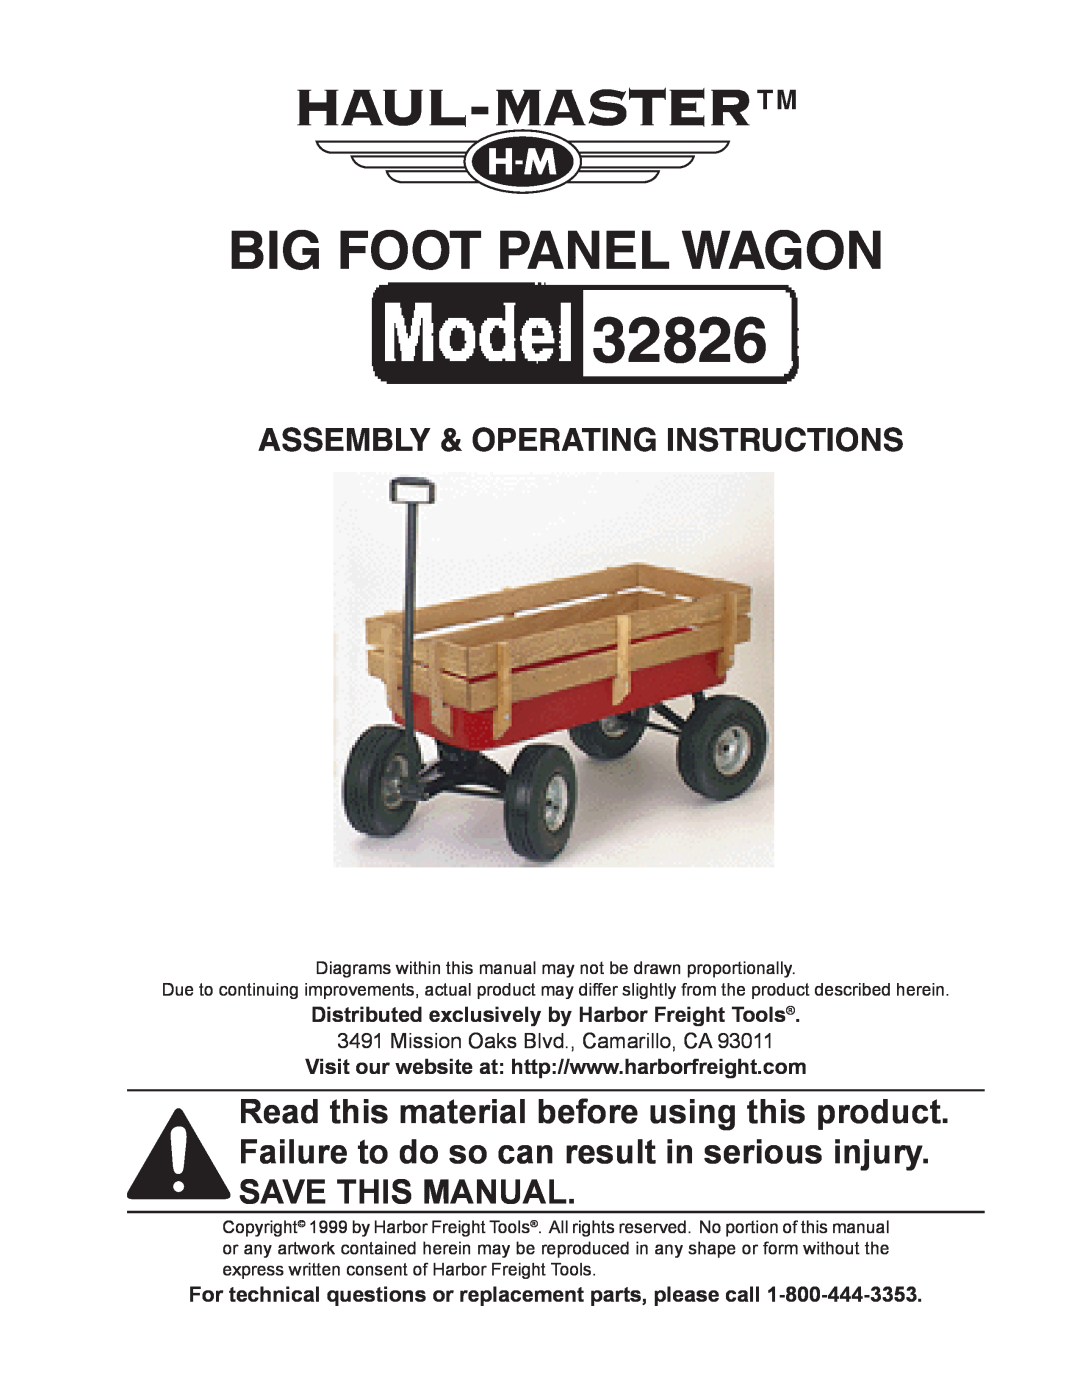 Harbor Freight Tools 32826 operating instructions Distributed exclusively by Harbor Freight Tools, Big Foot Panel Wagon 